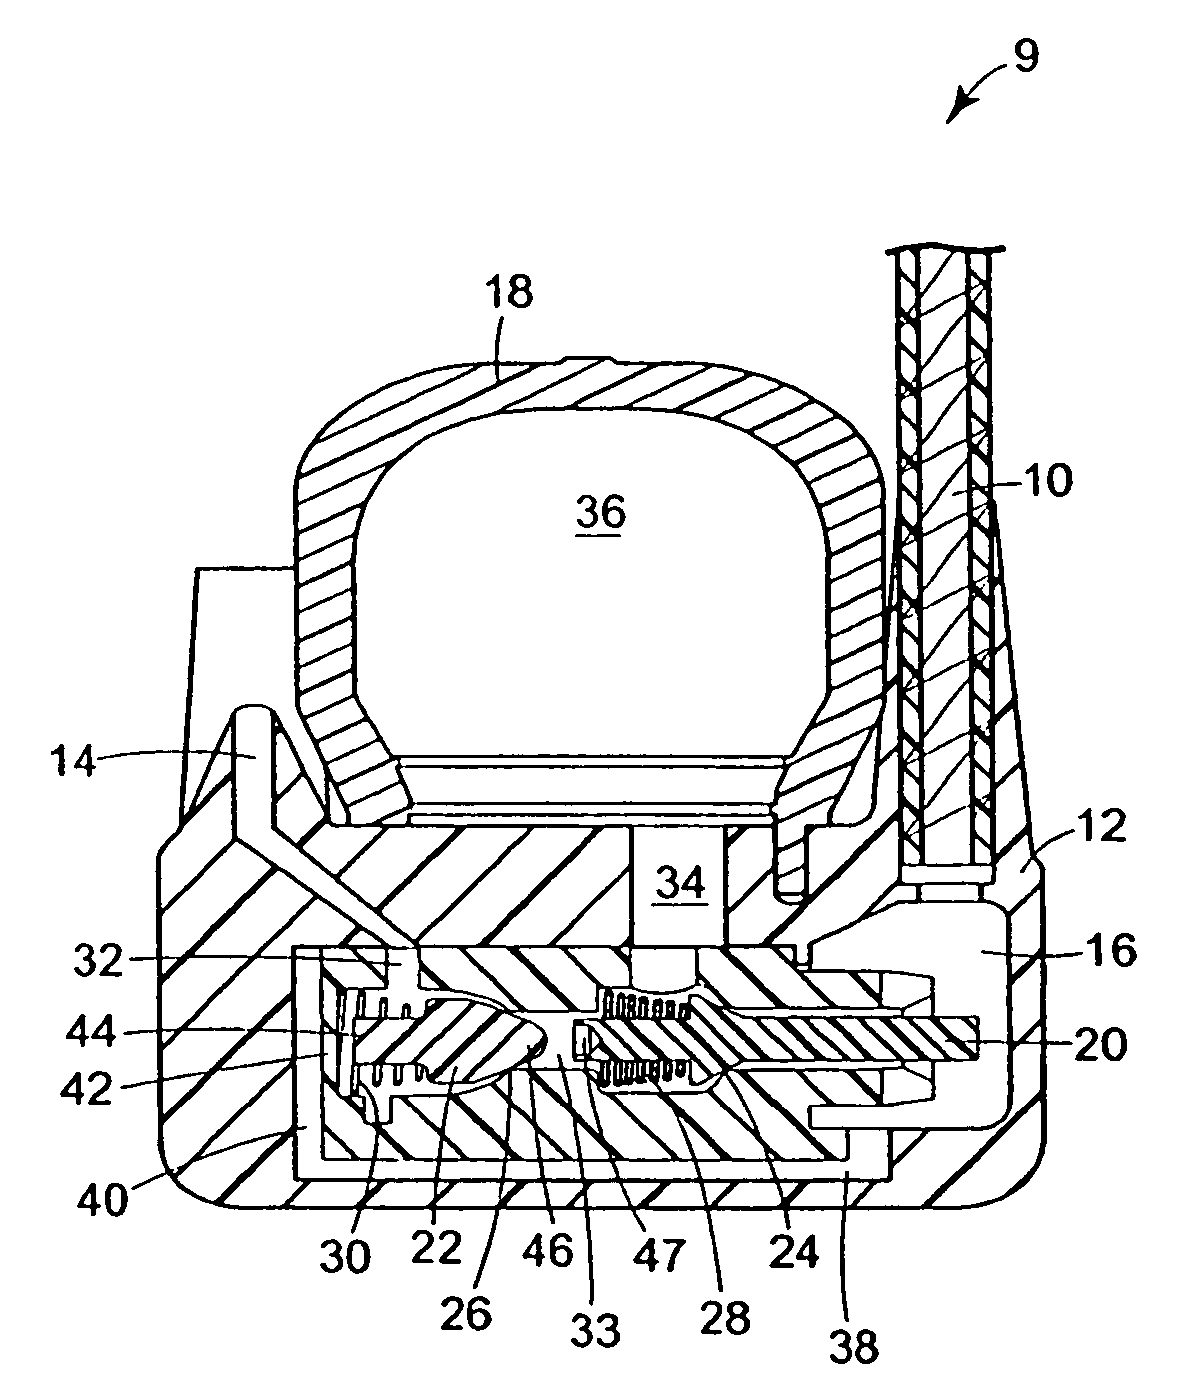 Method of preventing inadvertent inflation of an inflatable prosthesis